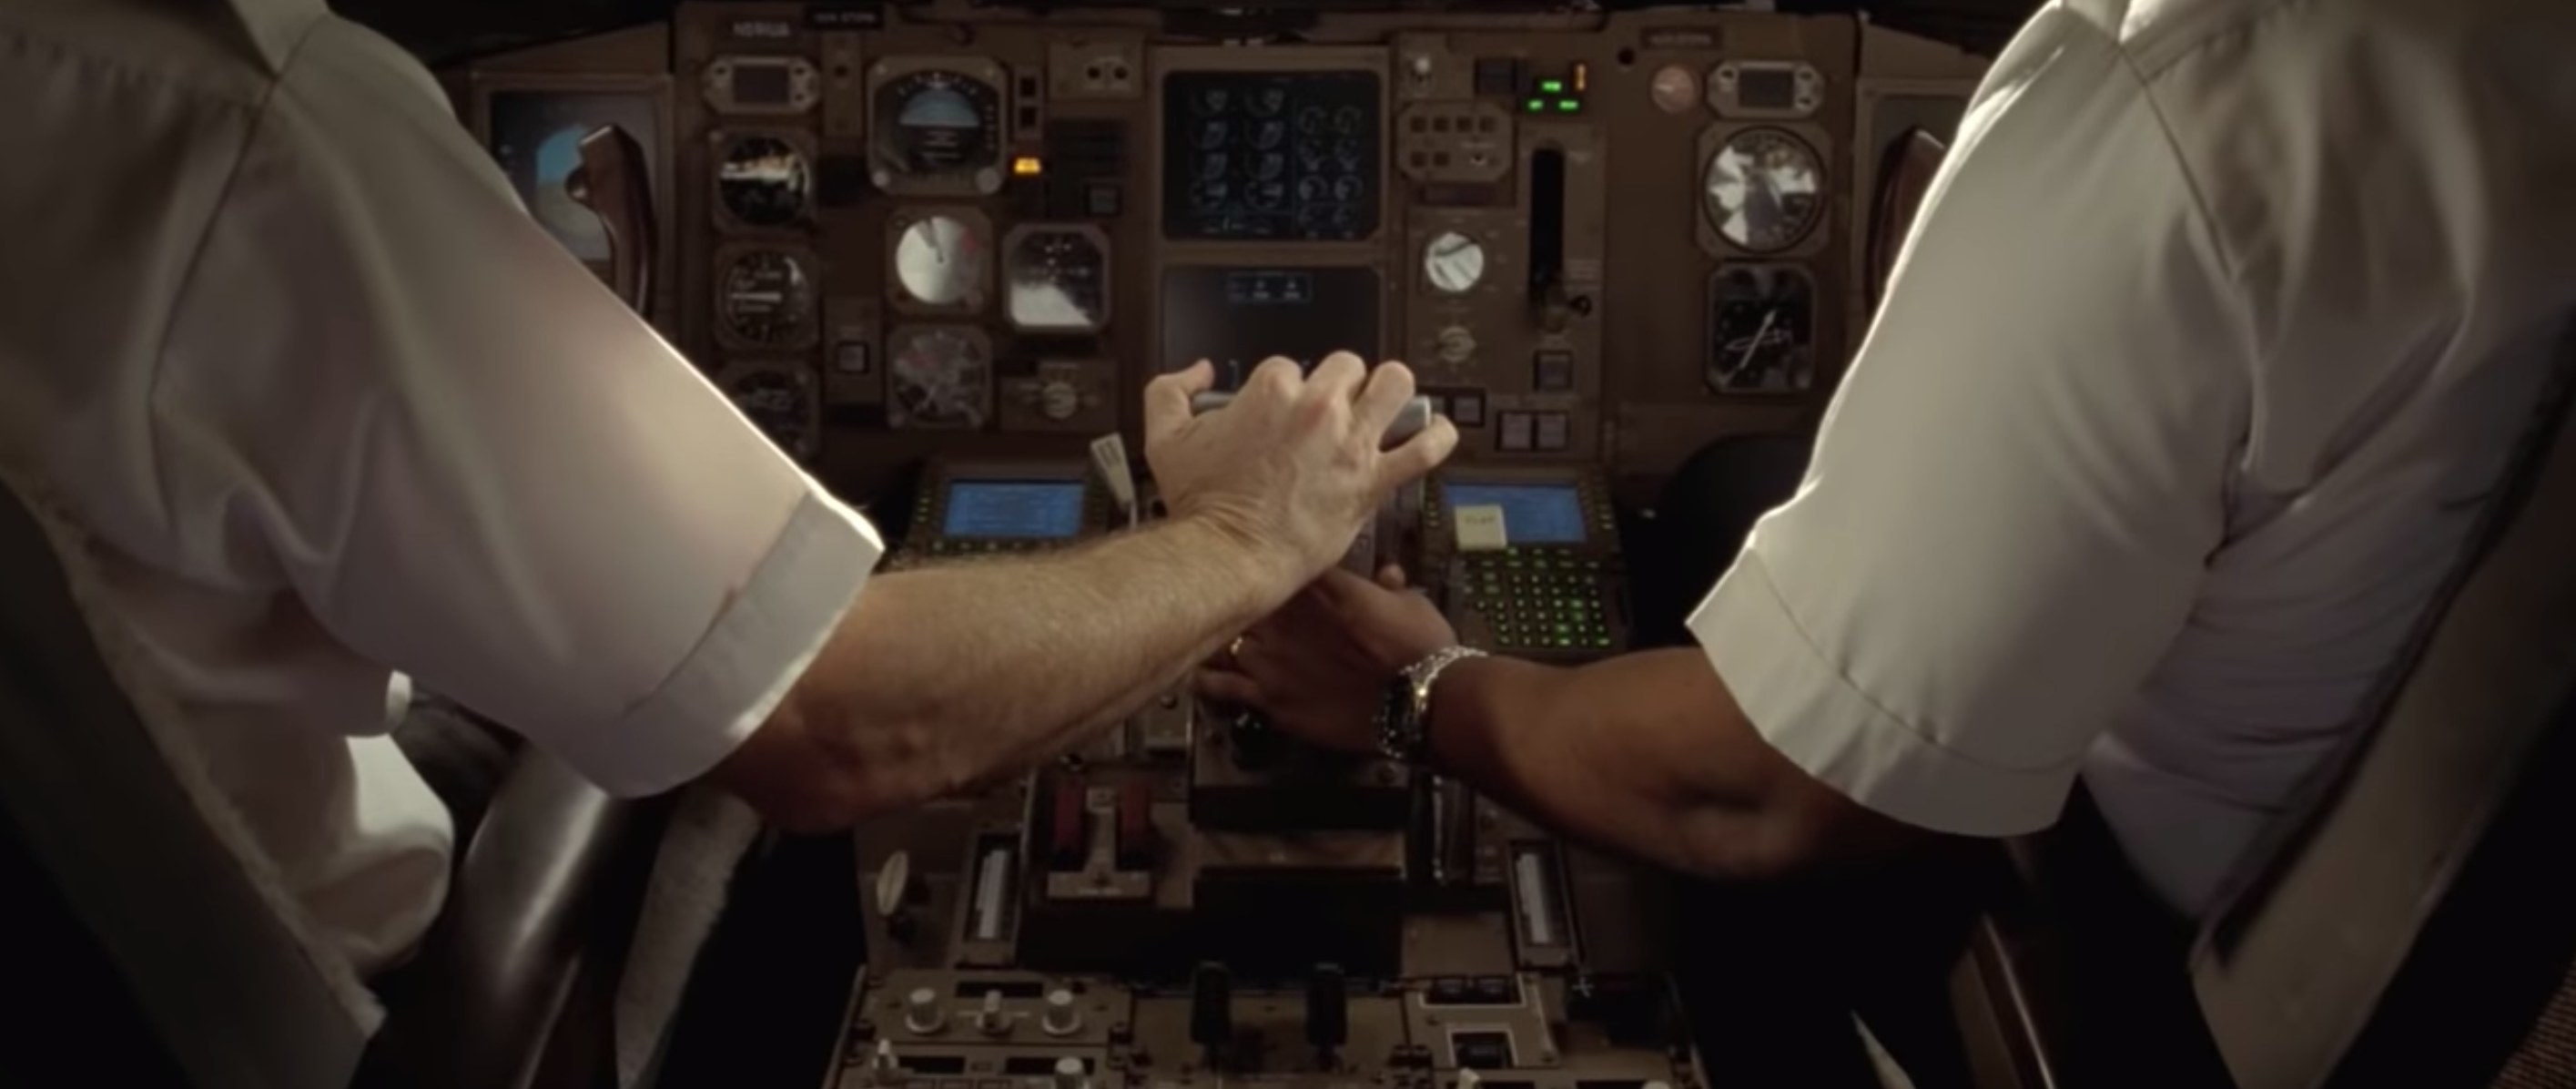 Two pilots holding hands while controlling a plane in the cockpit